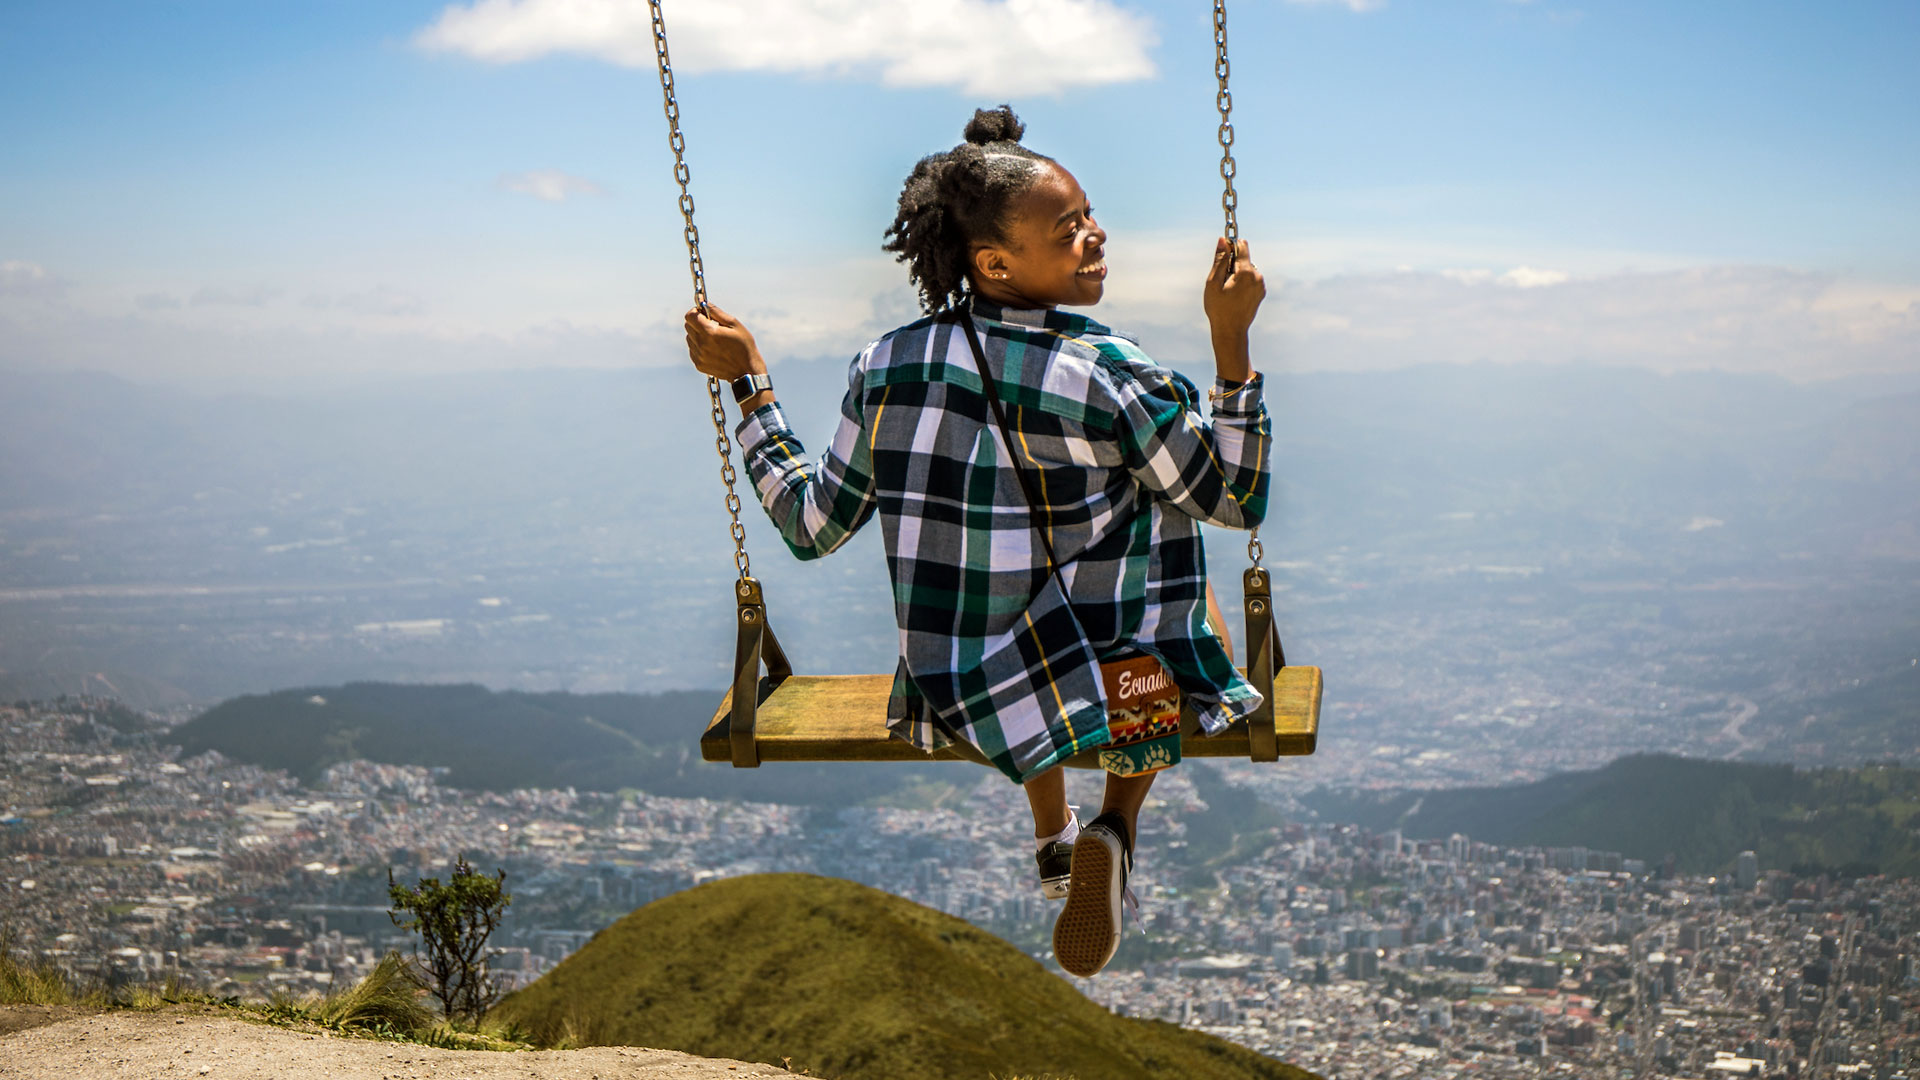 Janet Robinson braves the swing ride overlooking Quito